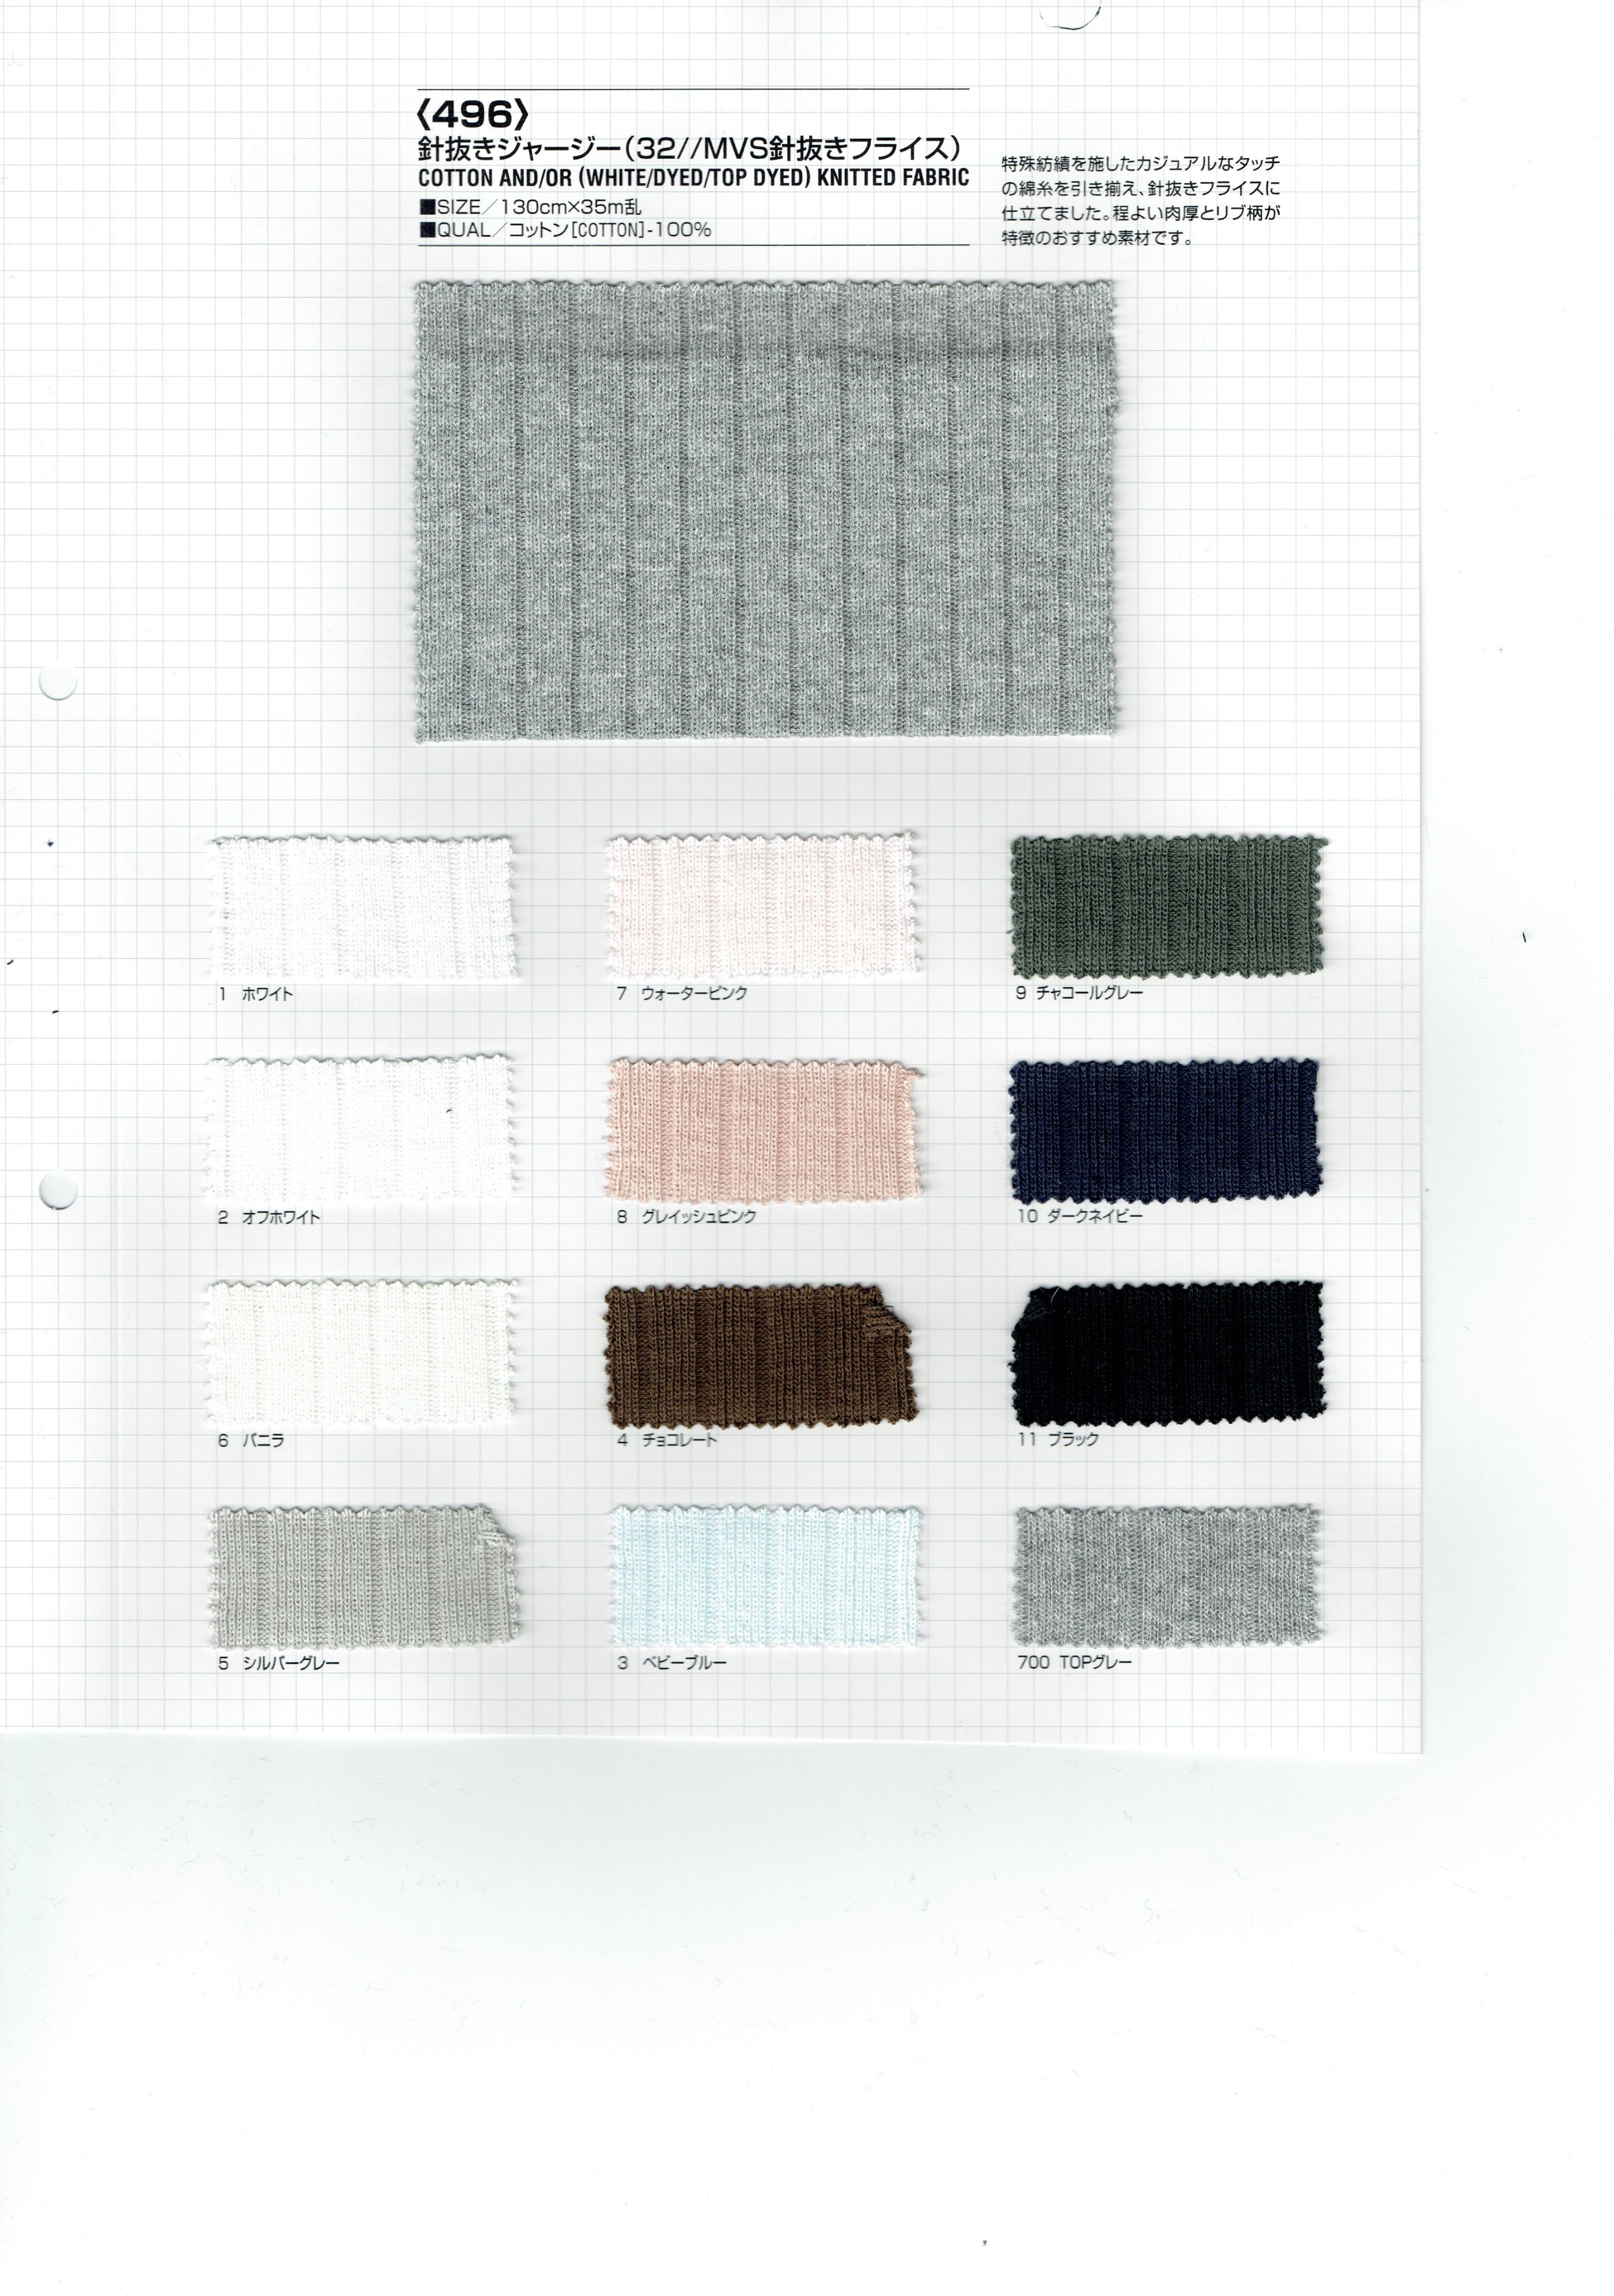 View 100% COTTON AND/OR[WHITE/DYED/TOP DYED] KNITTED FABRIC